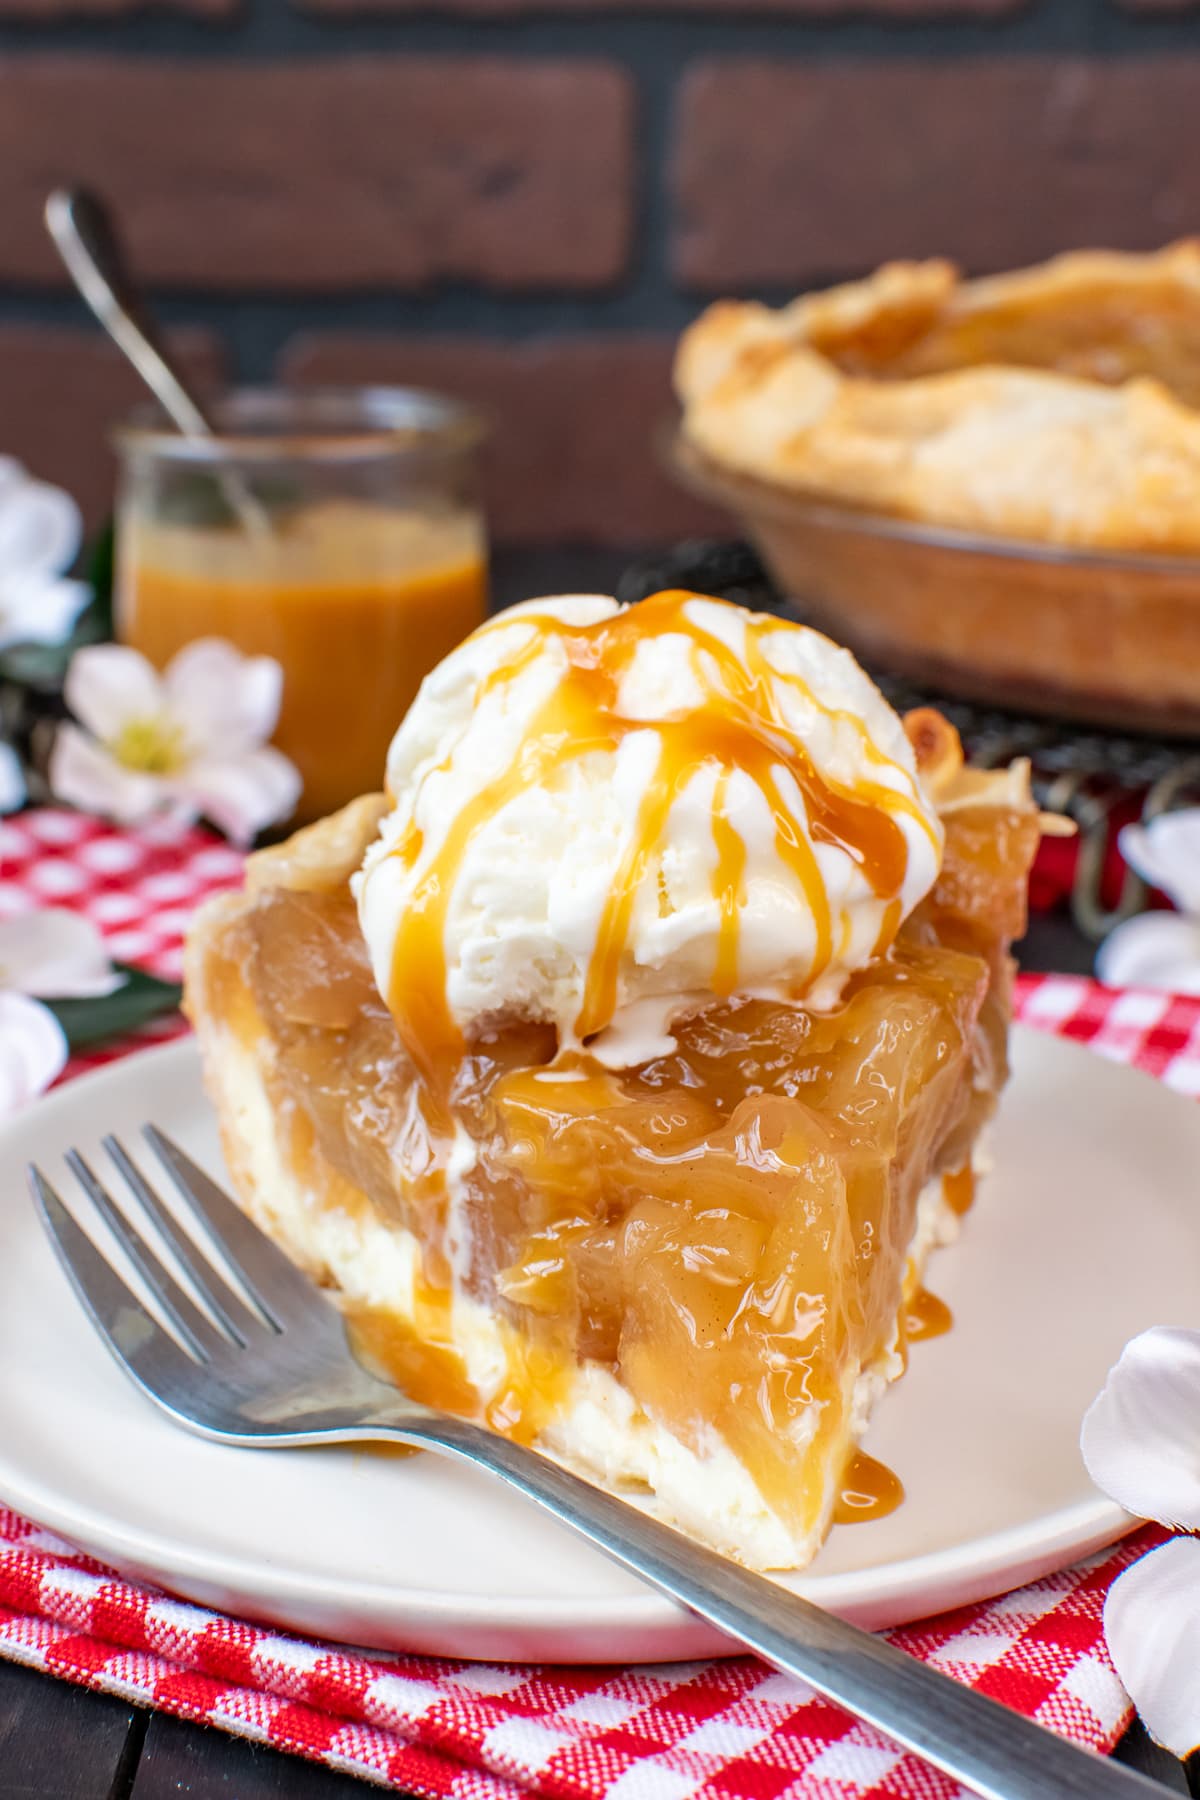 A plate with a slice of pie topped with ice cream and caramel.